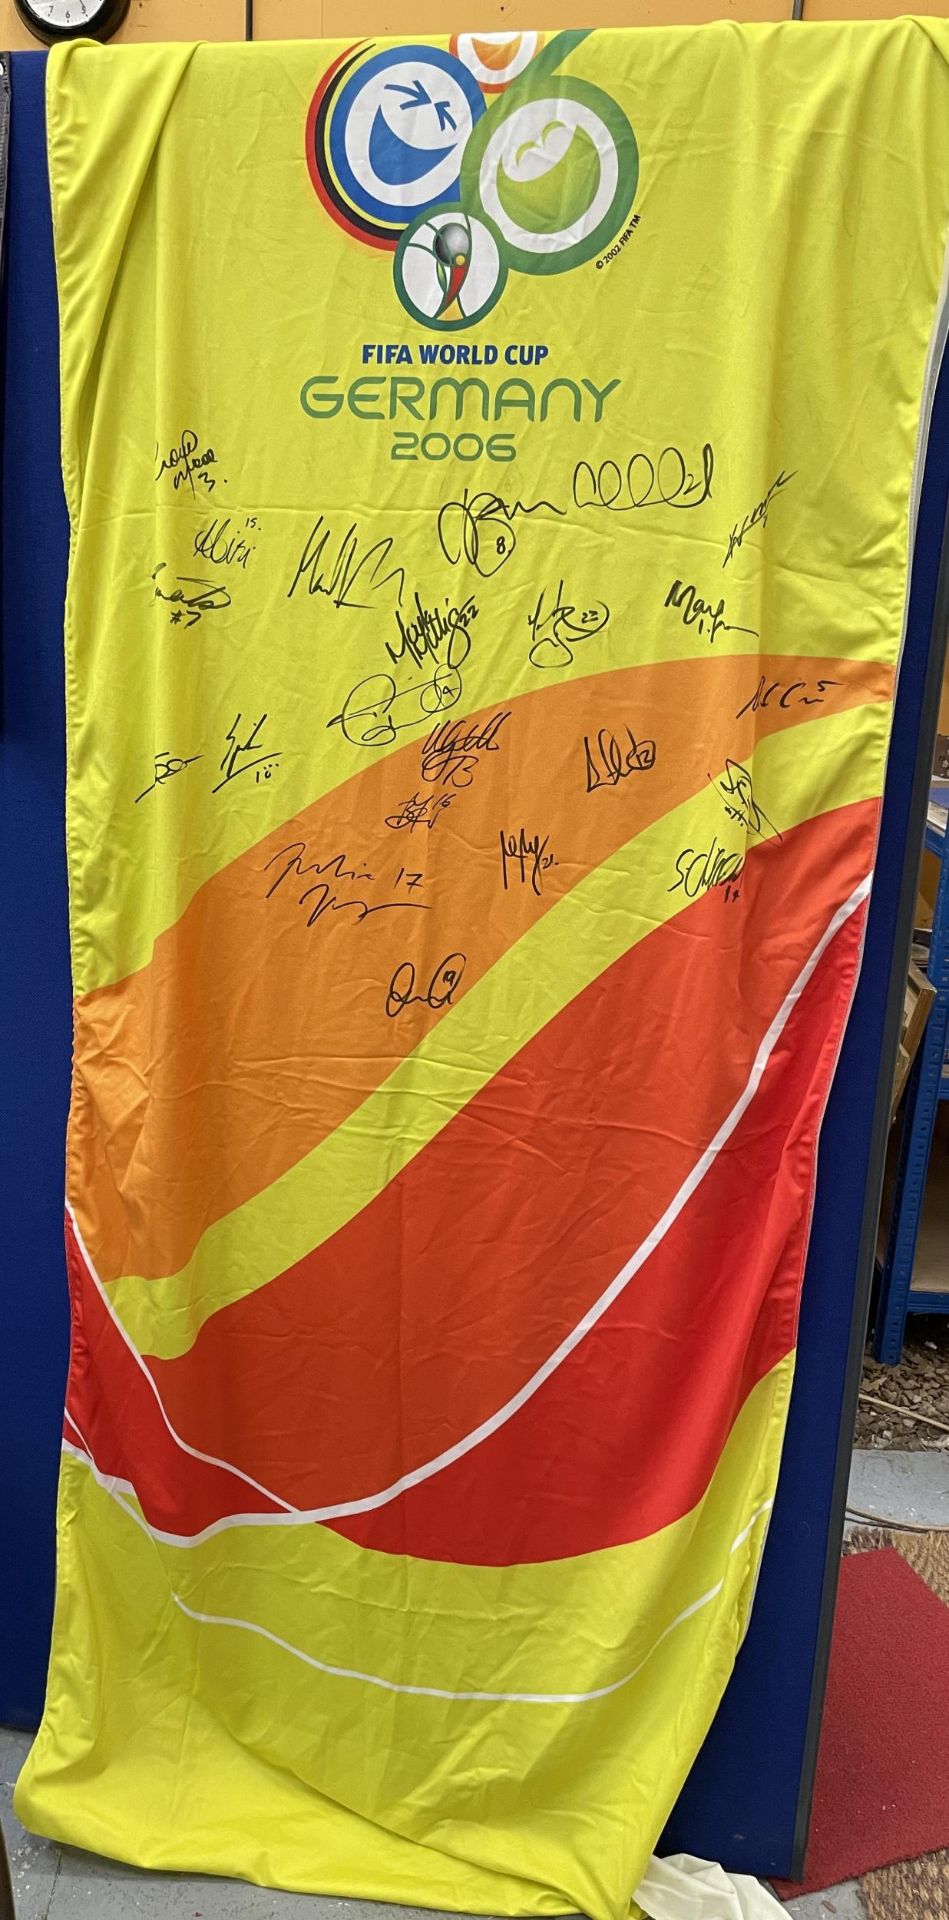 A FIFA WORLD CUP 2006 GERMANY SIGNED FLAG